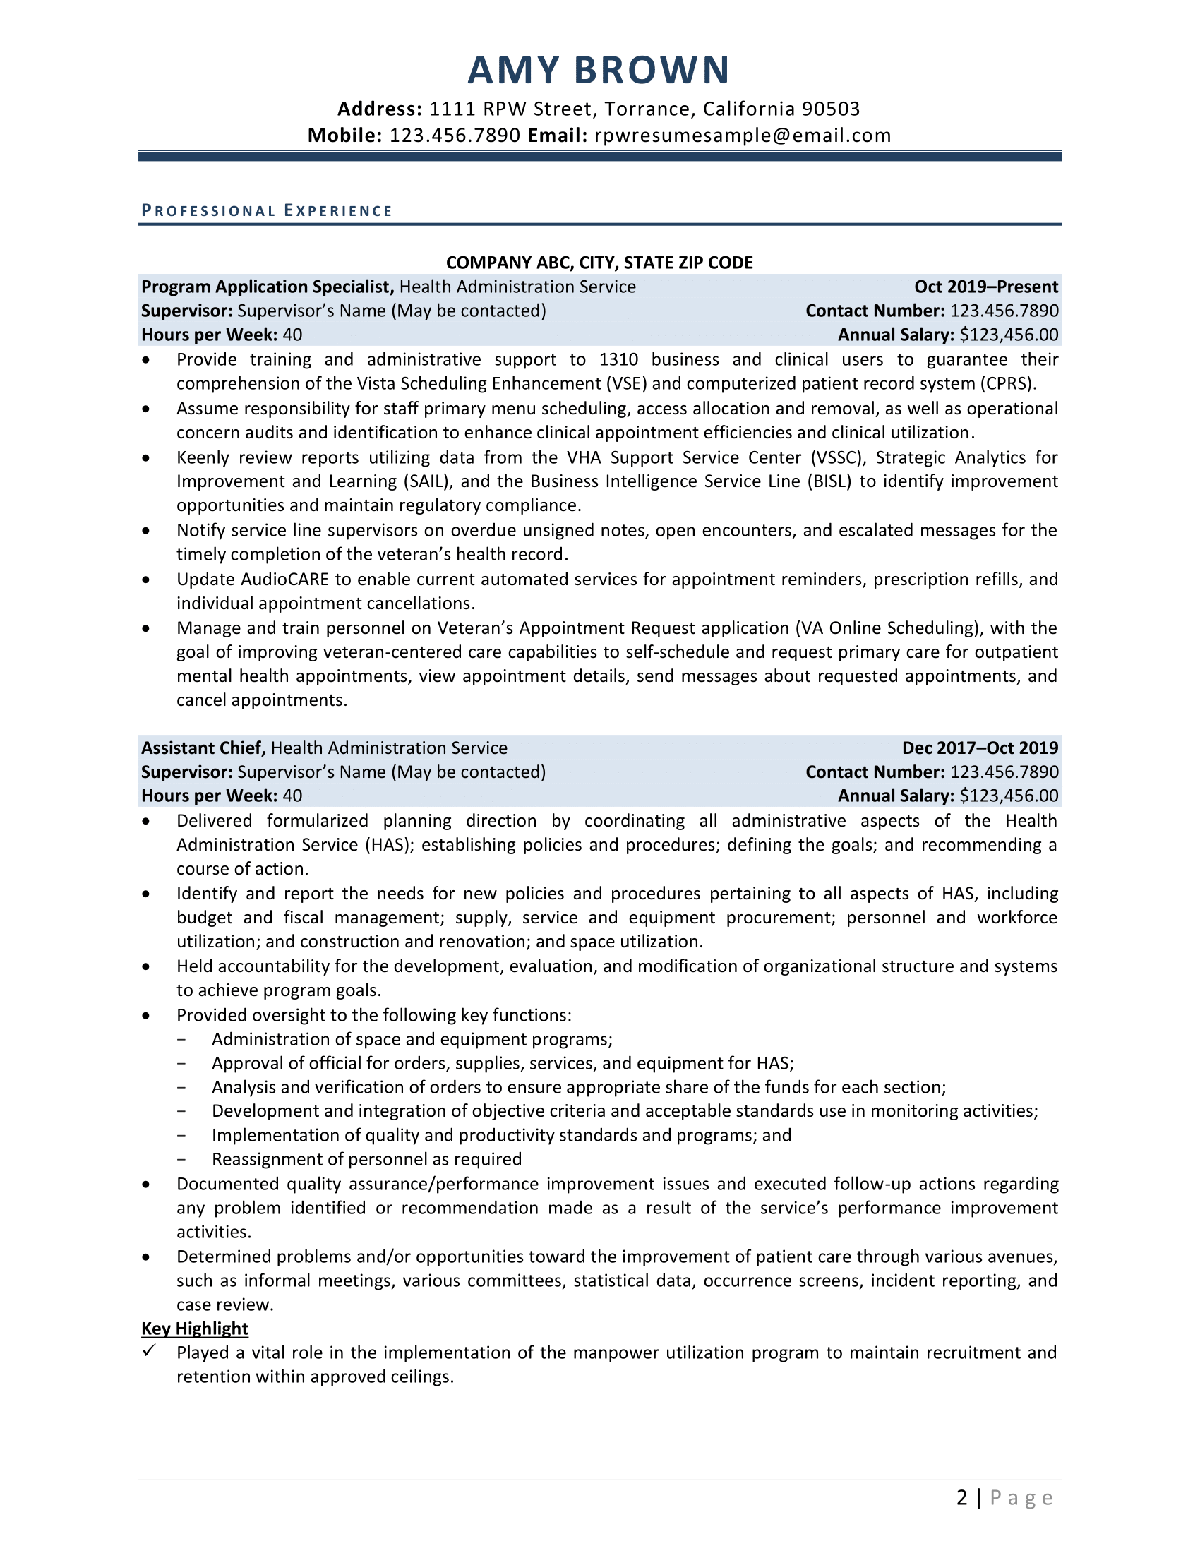 Health Systems Specialist Federal Resume Example Page 2